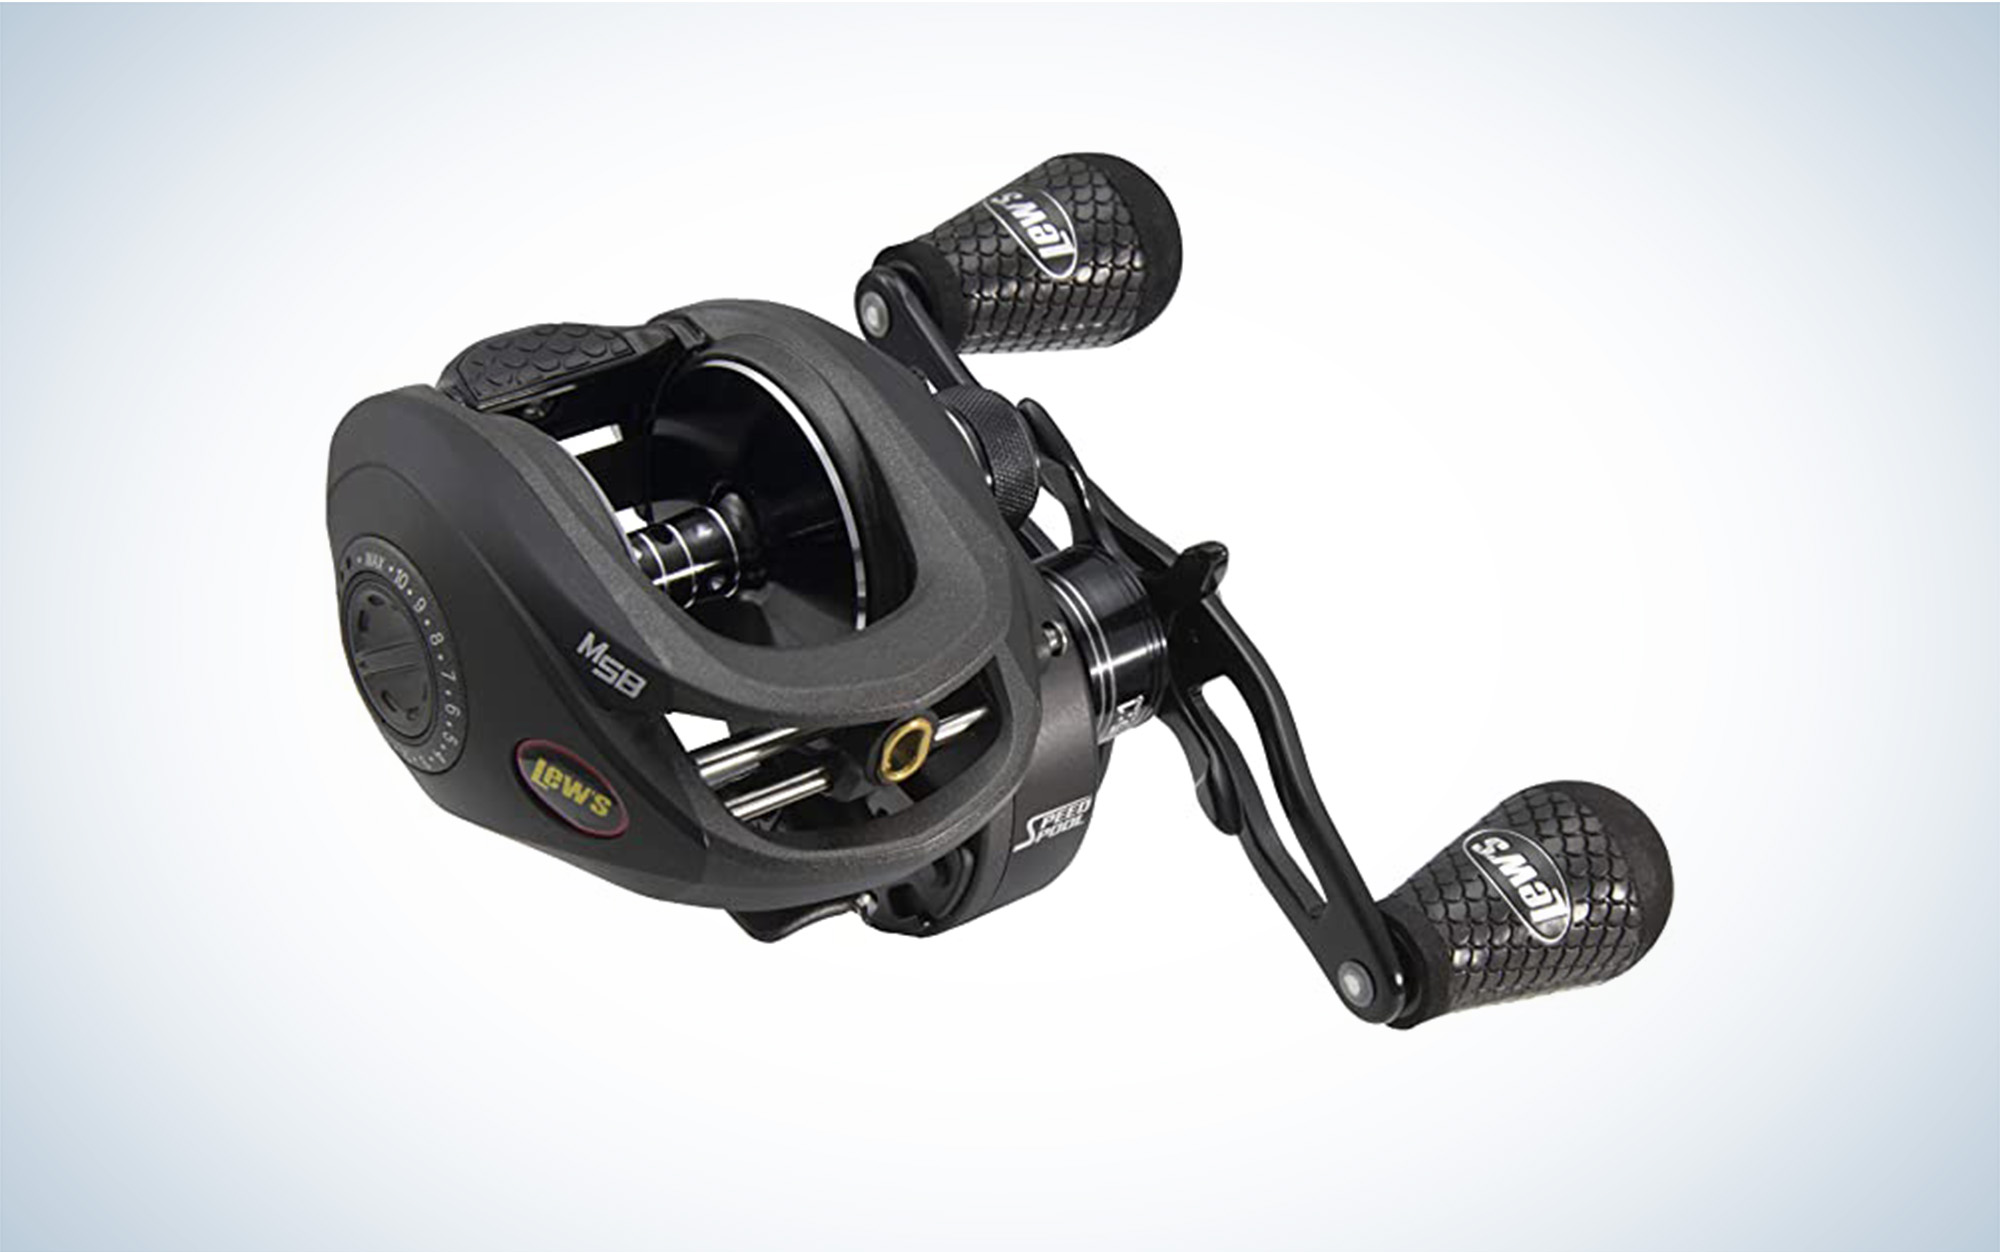 The Lew's Super Duty 300 is an affordable reel